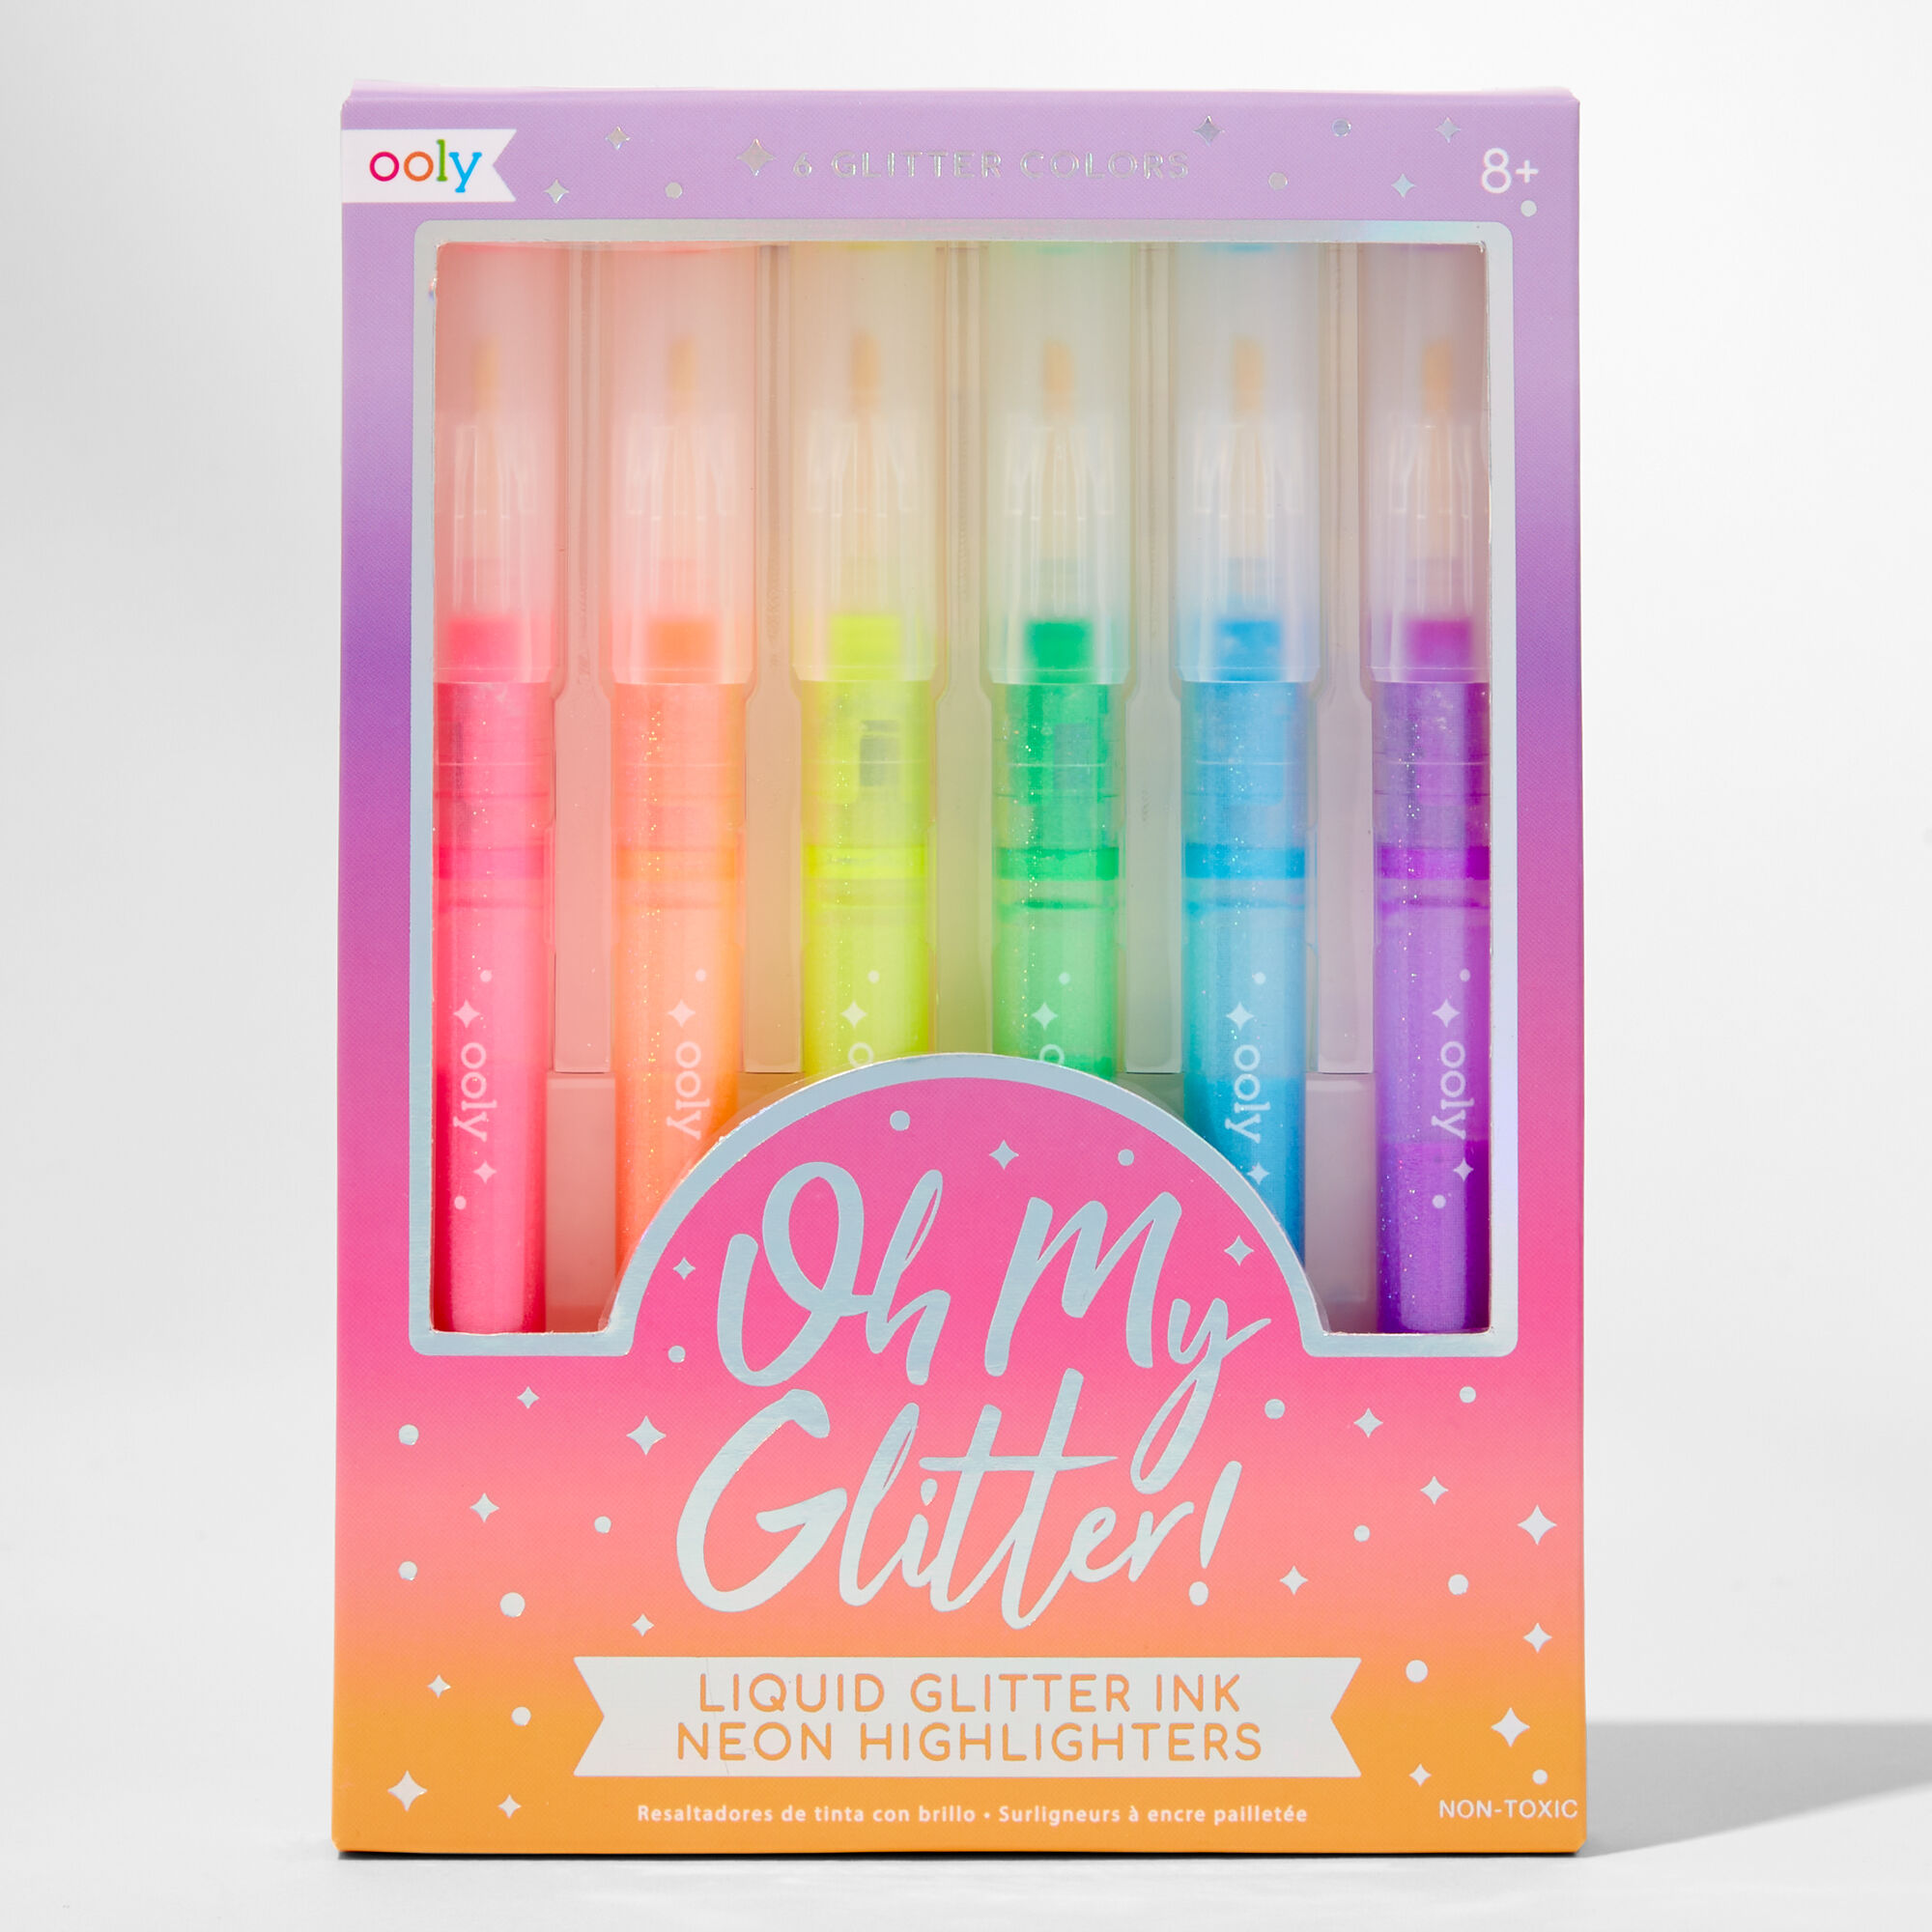 ooly™ Oh My Glitter! Liquid Glitter Ink Neon Highlighers (6 pack)